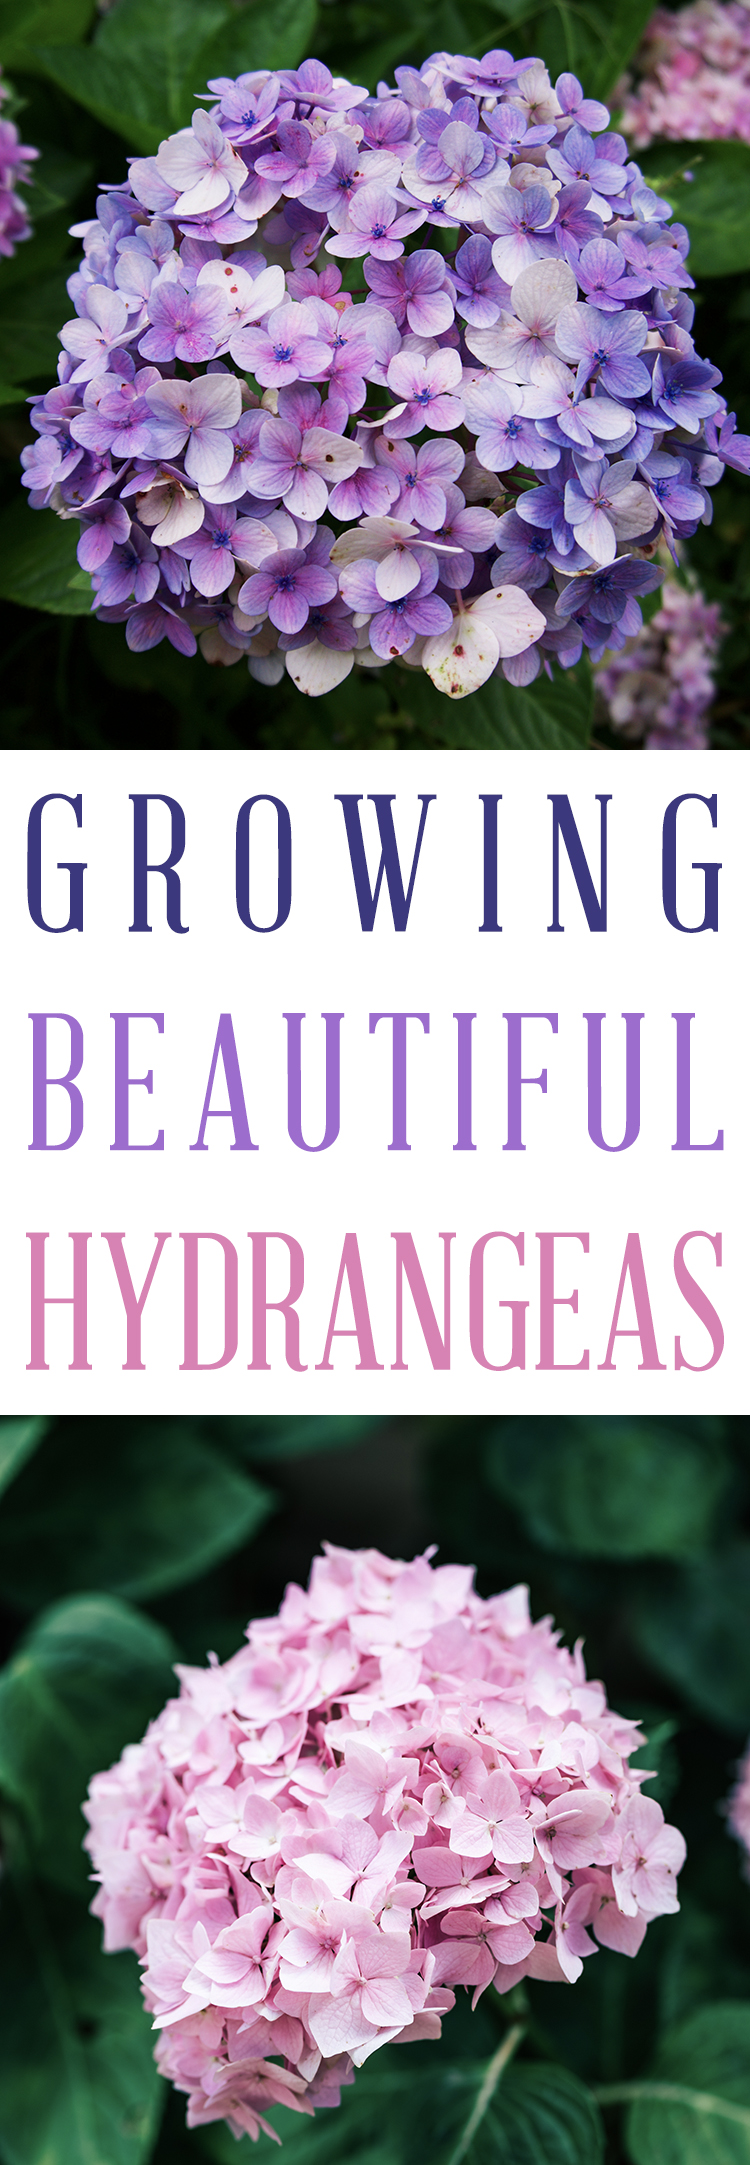 How to Grow the Perfect hydrangeas - Easy tips for planting and growing hydrangea flowers